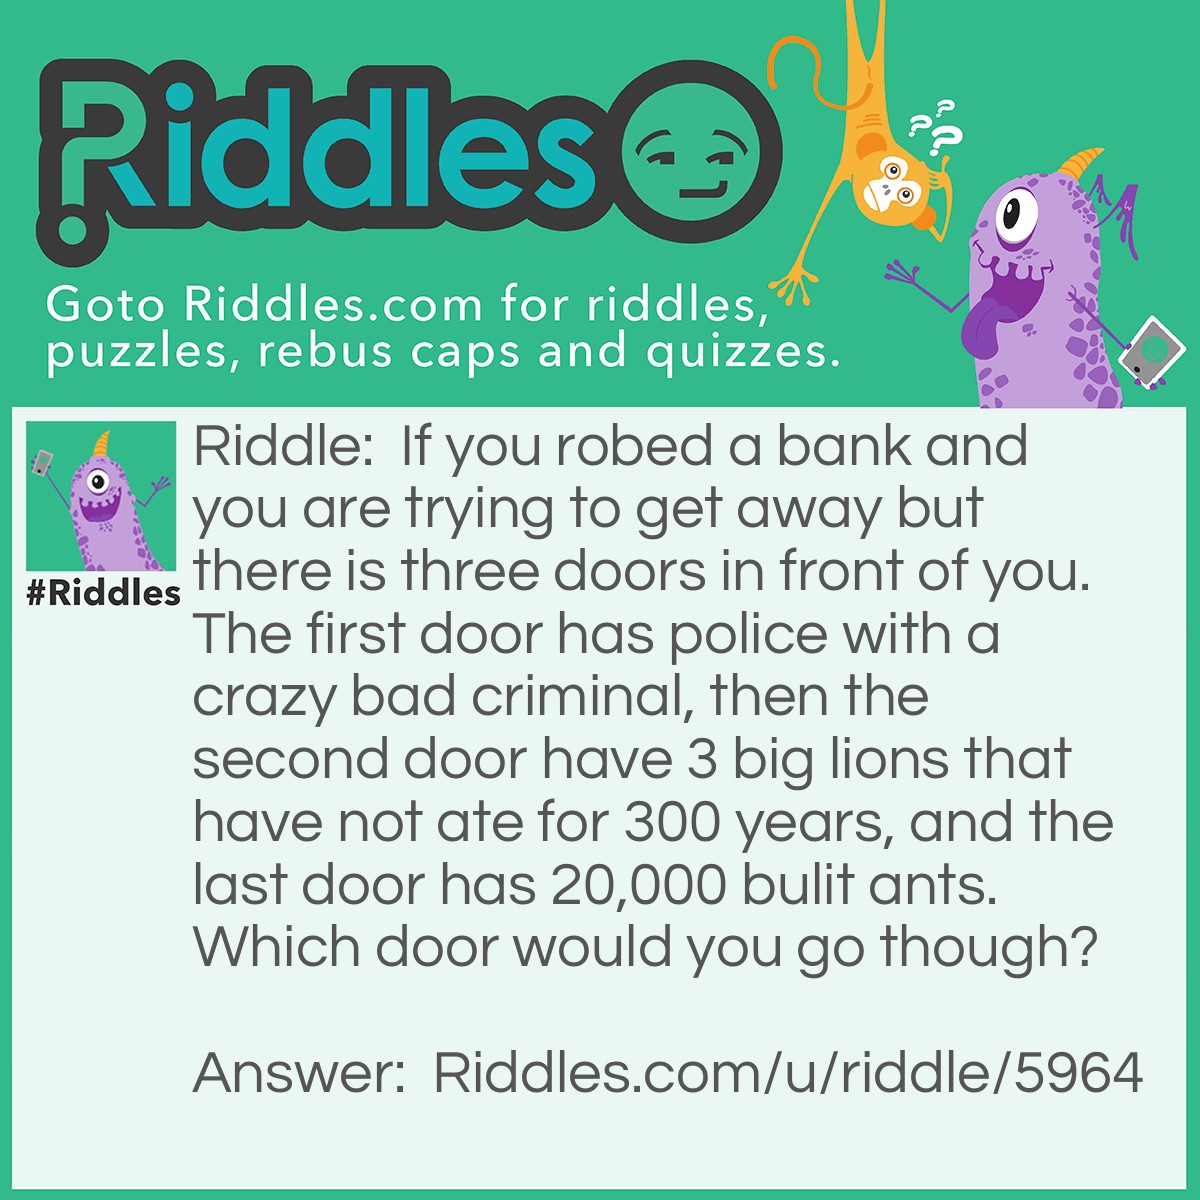 Riddle: If you robed a bank and you are trying to get away but there is three doors in front of you. The first door has police with a crazy bad criminal, then the second door have 3 big lions that have not ate for 300 years, and the last door has 20,000 bulit ants. Which door would you go though? Answer: The second door because if 3 lions have not ate for 300 years, they would be dead.